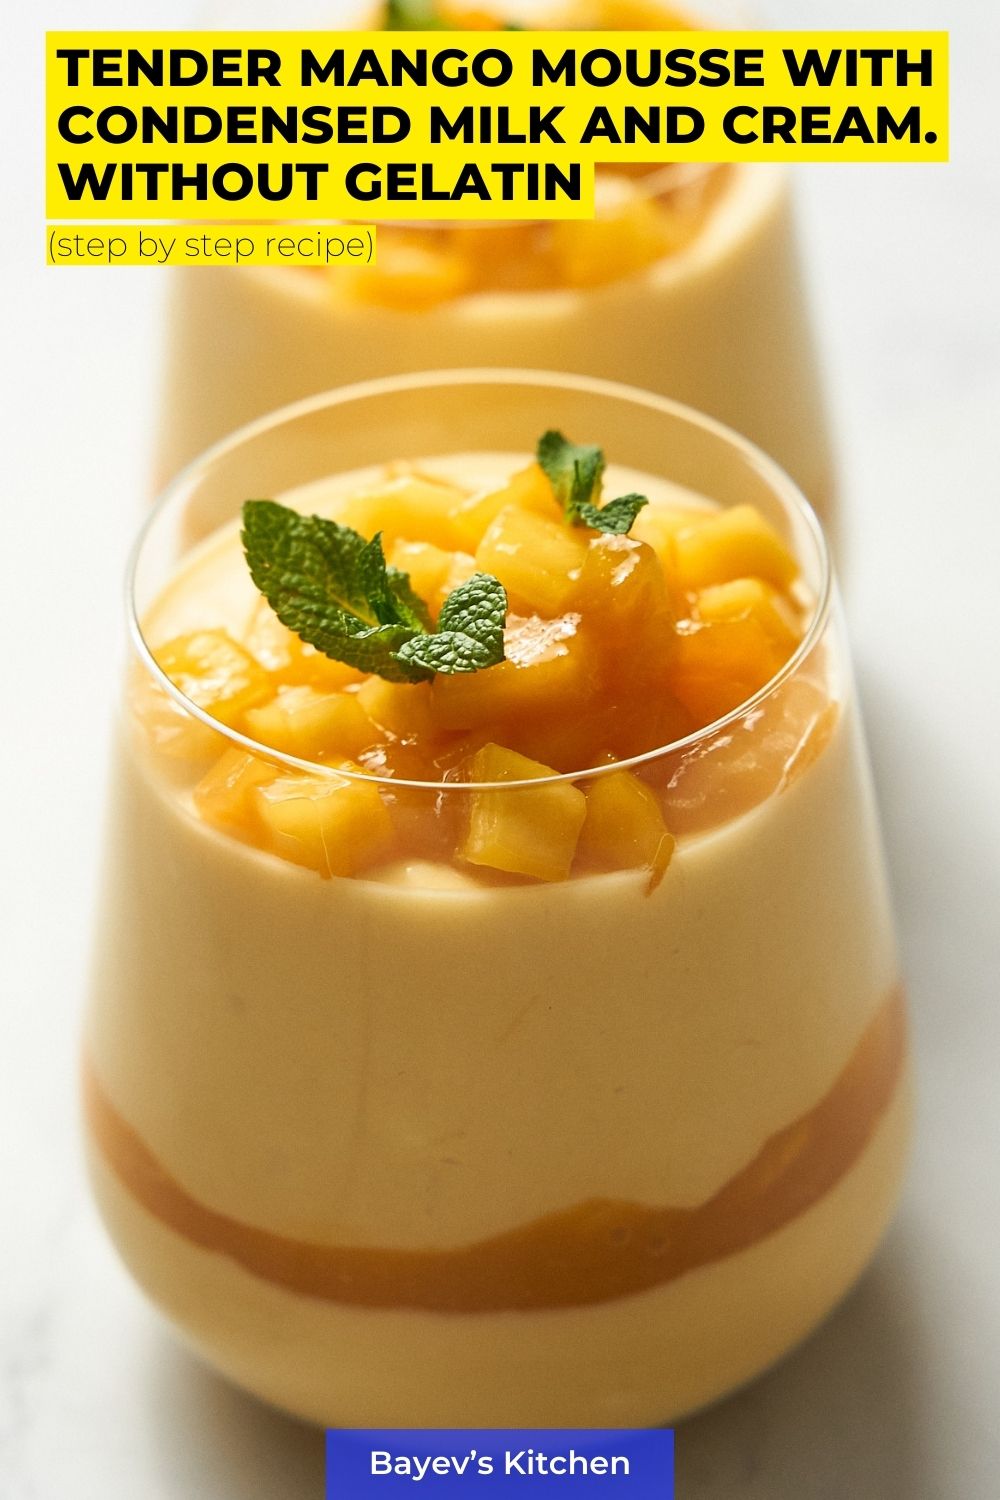 Tender mango mousse with condensed milk and cream. Without gelatin by bayevskitchen.com